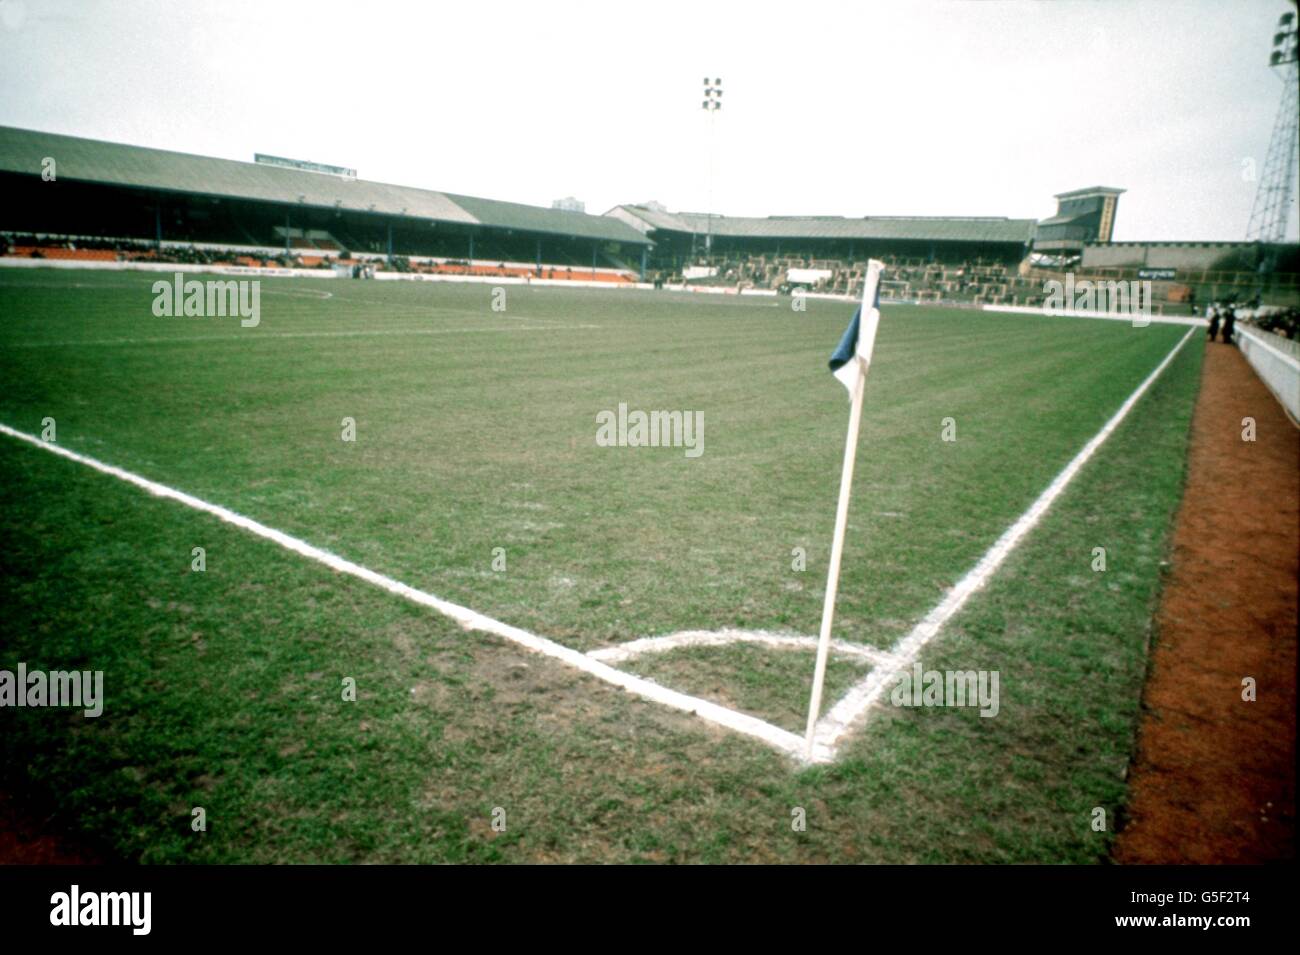 Soccer - English Football League Grounds - The Den. The Den, home of Millwall FC Stock Photo